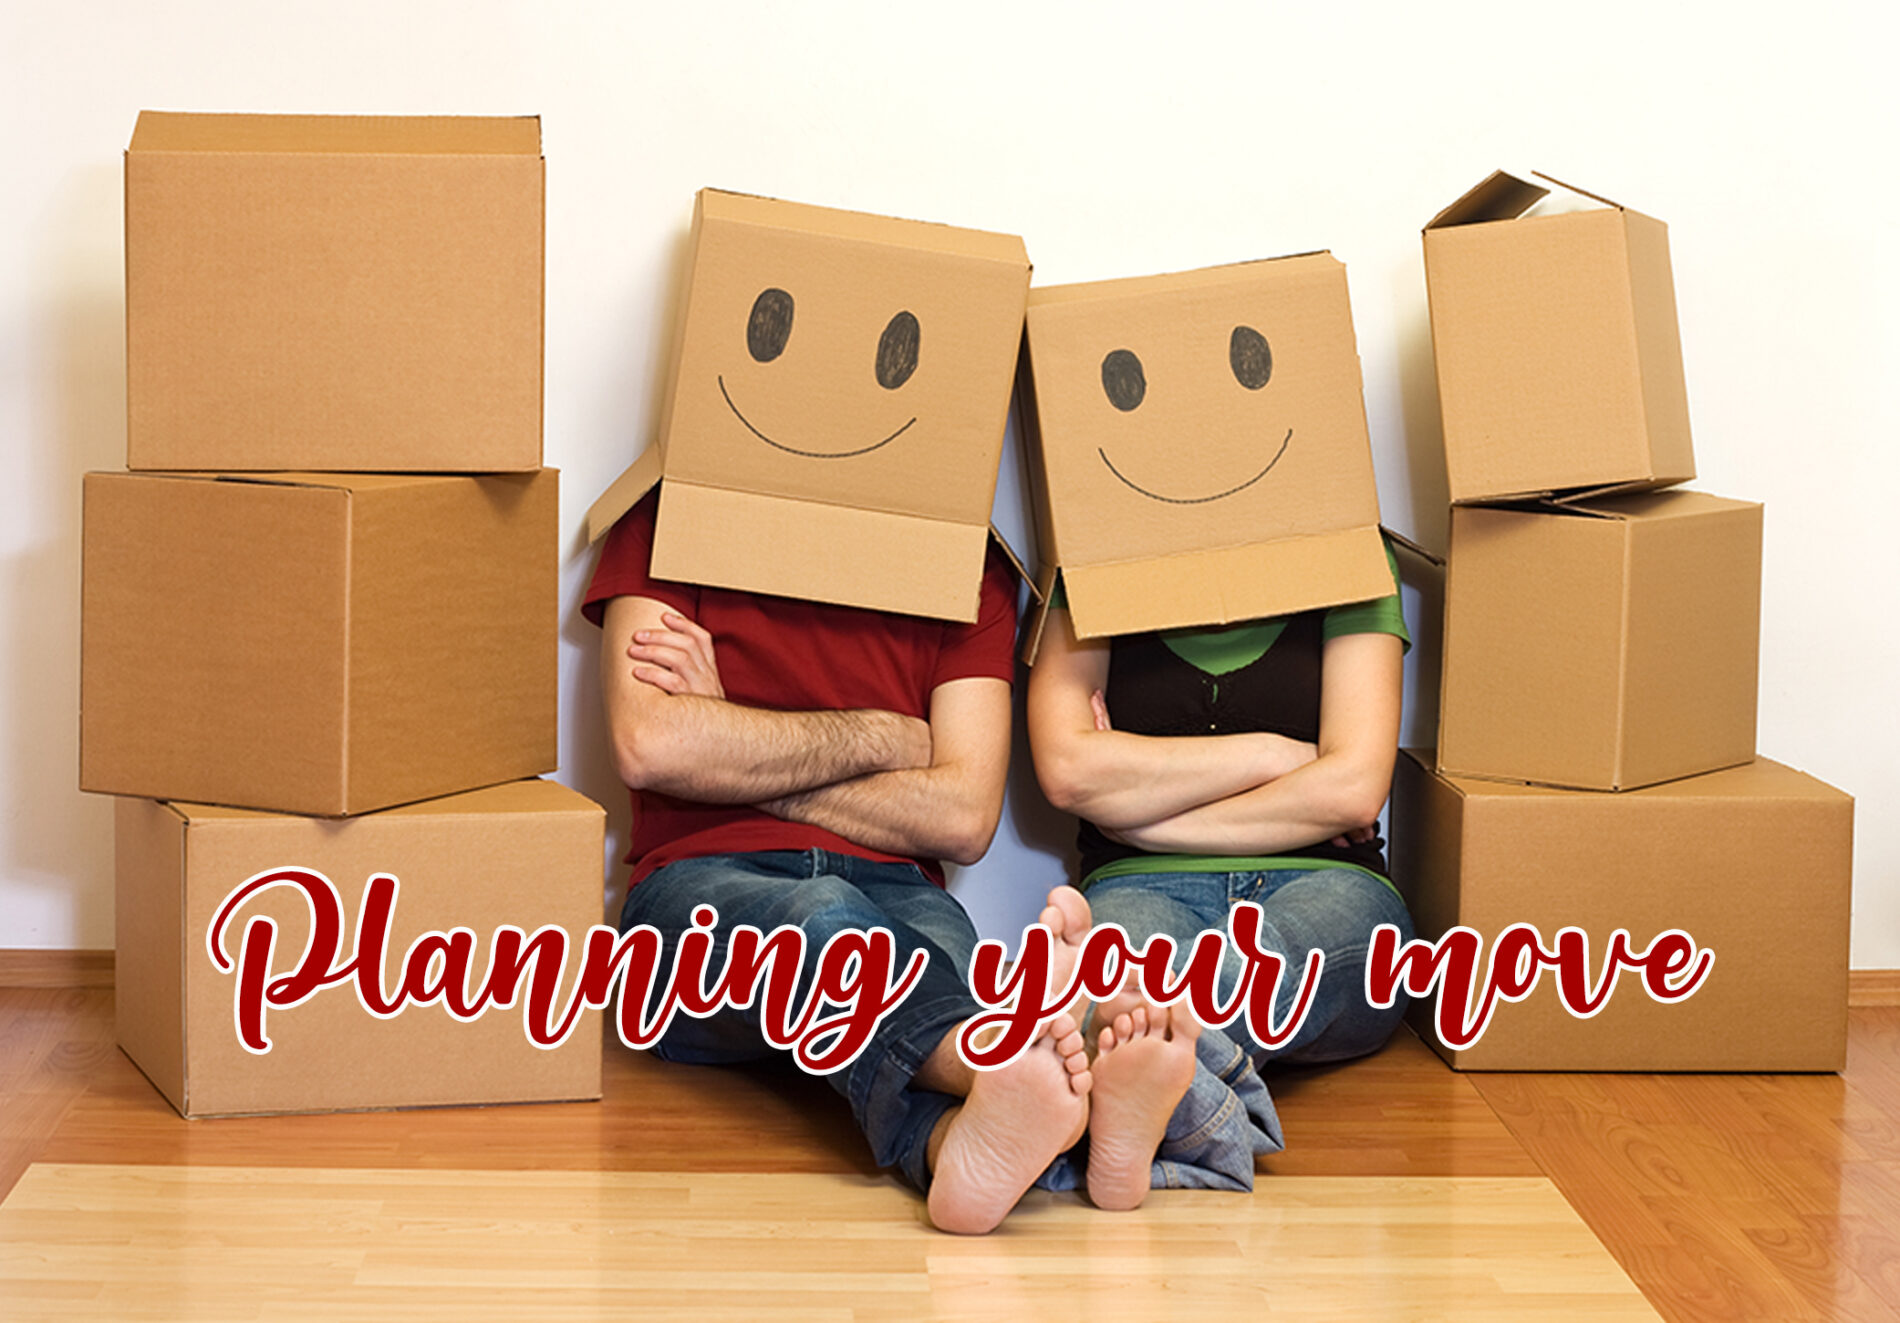 Plan your move now to avoid the stress